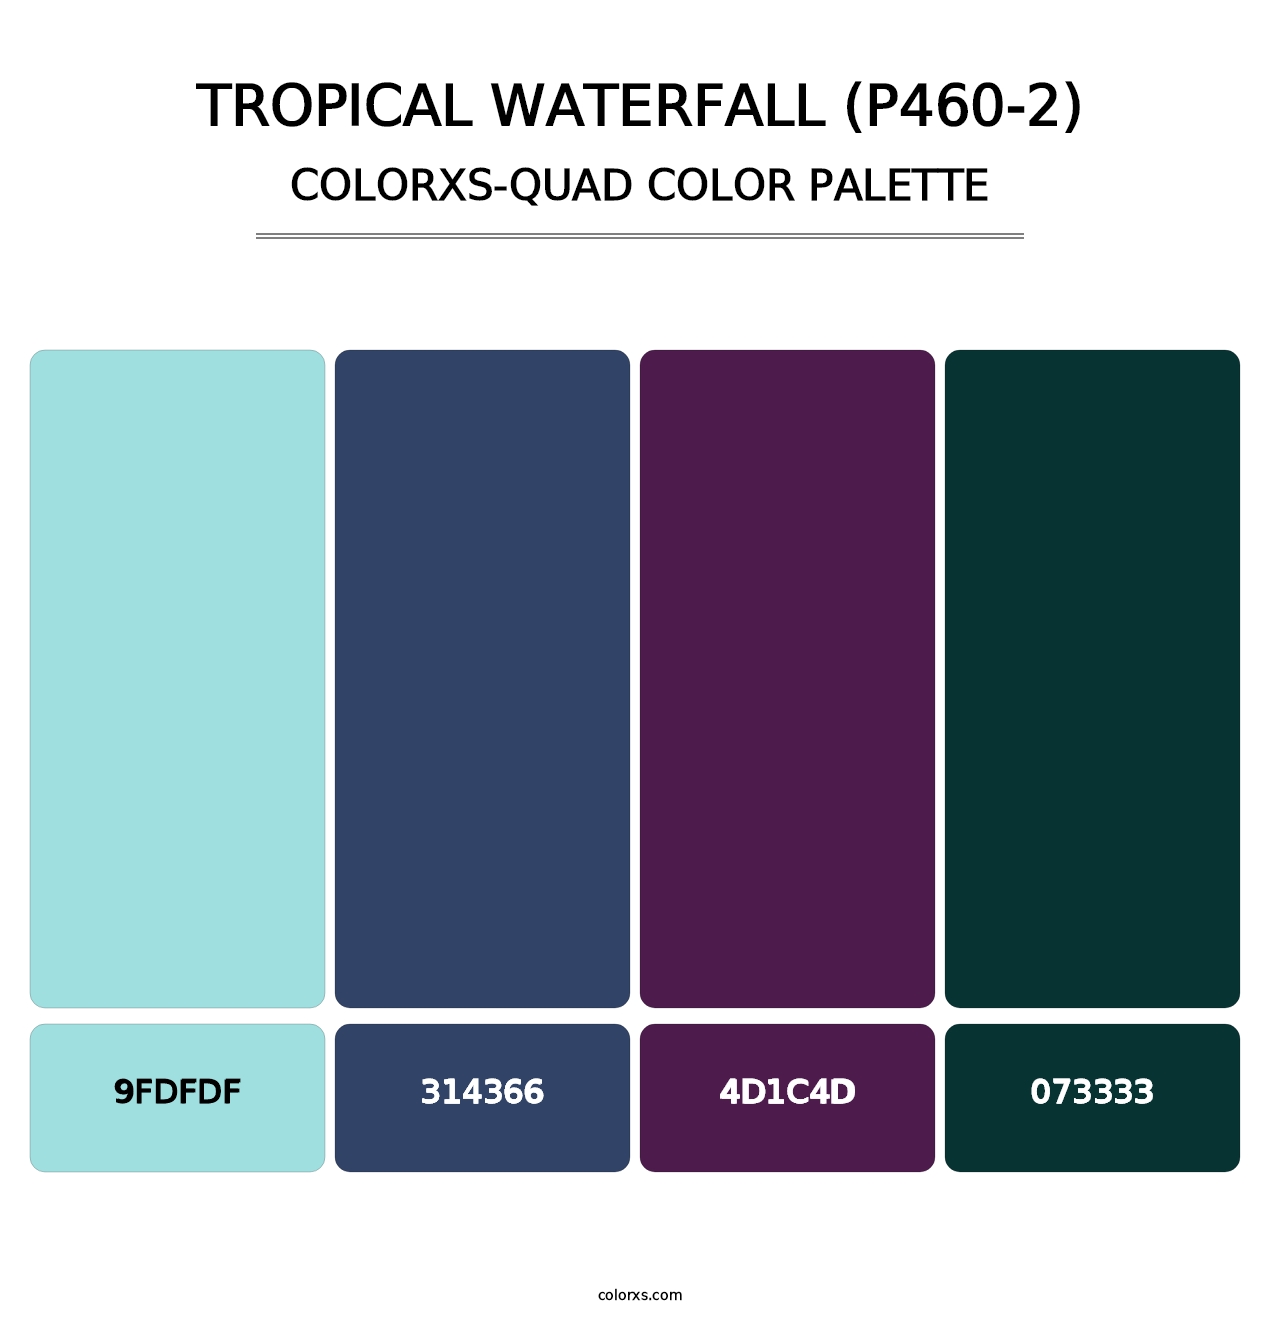 Tropical Waterfall (P460-2) - Colorxs Quad Palette